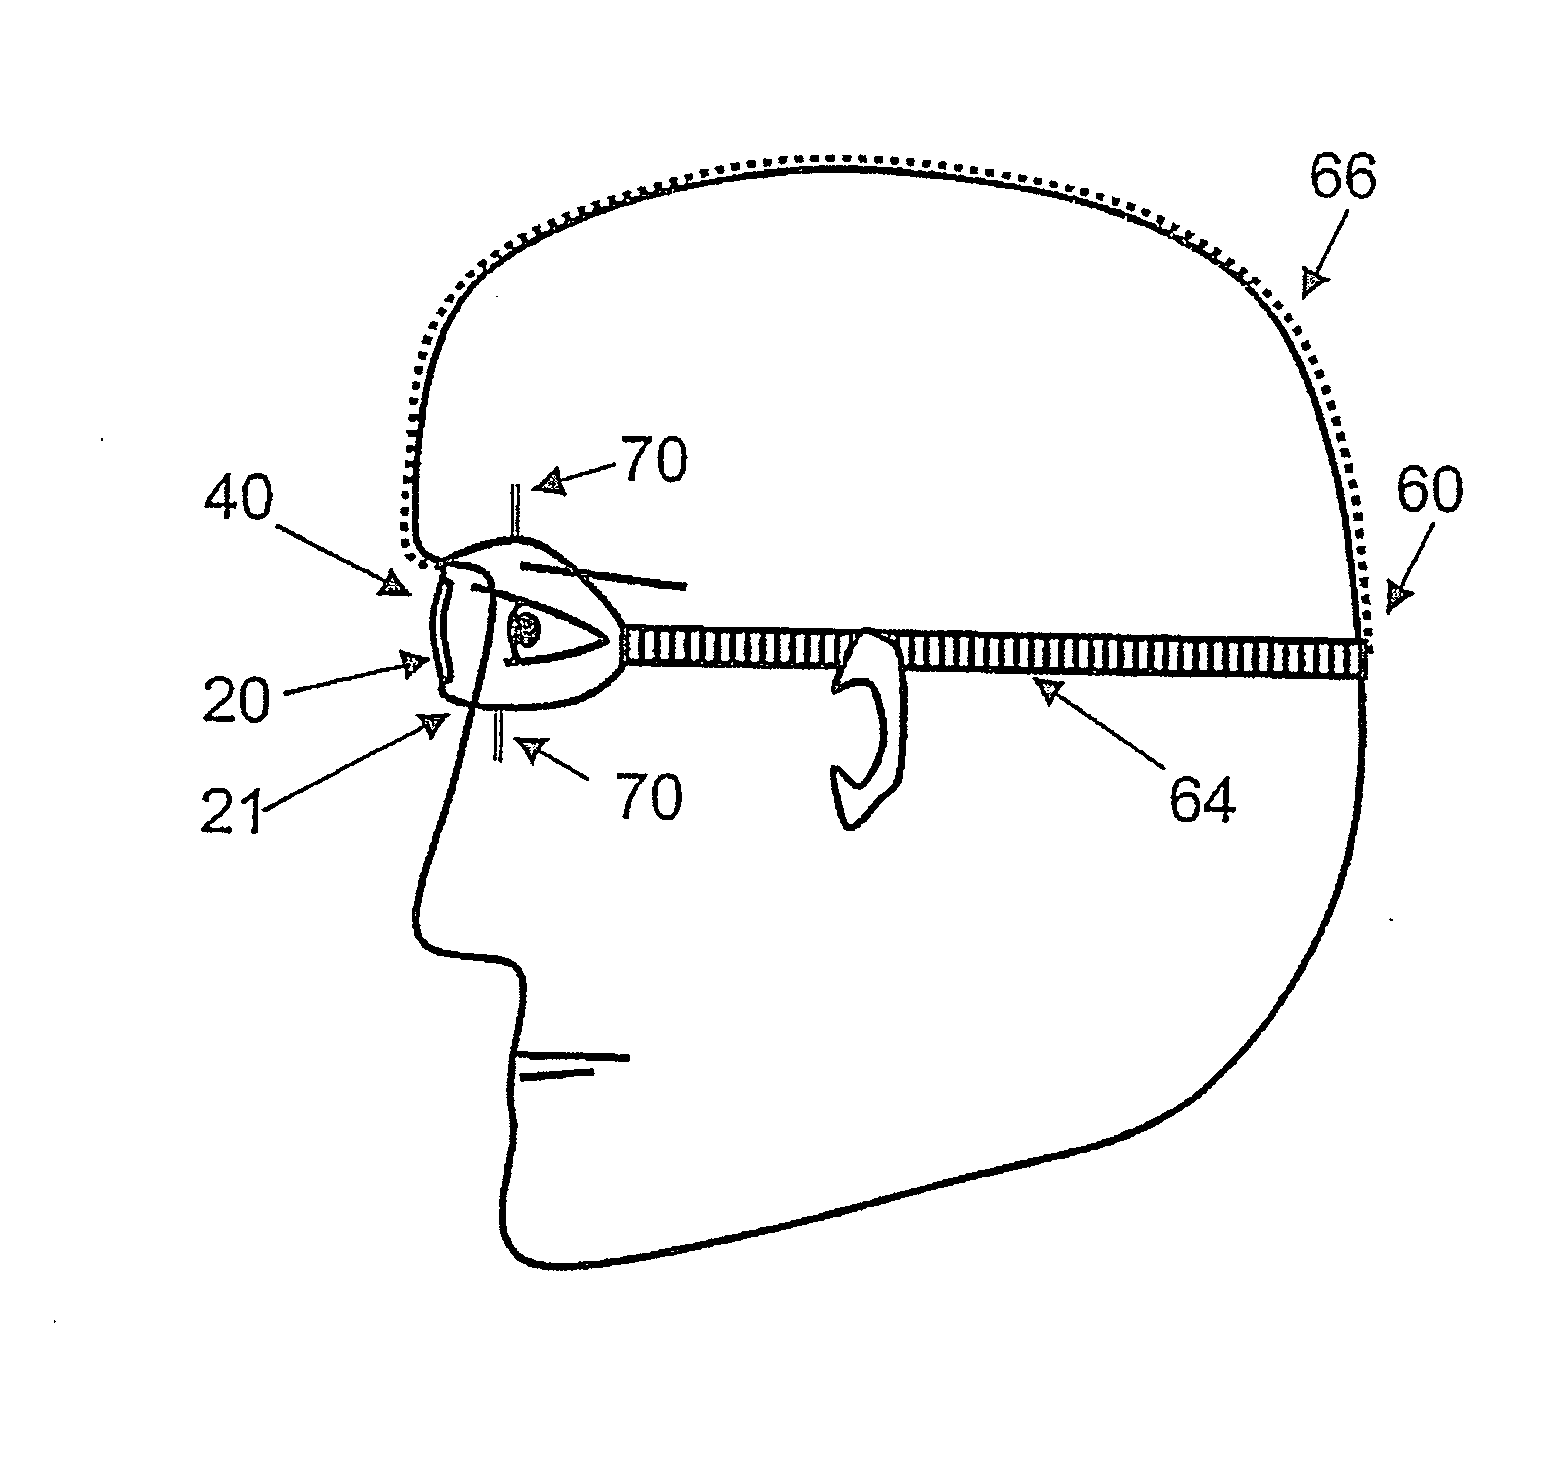 Goggles for Improved Ocular Vision